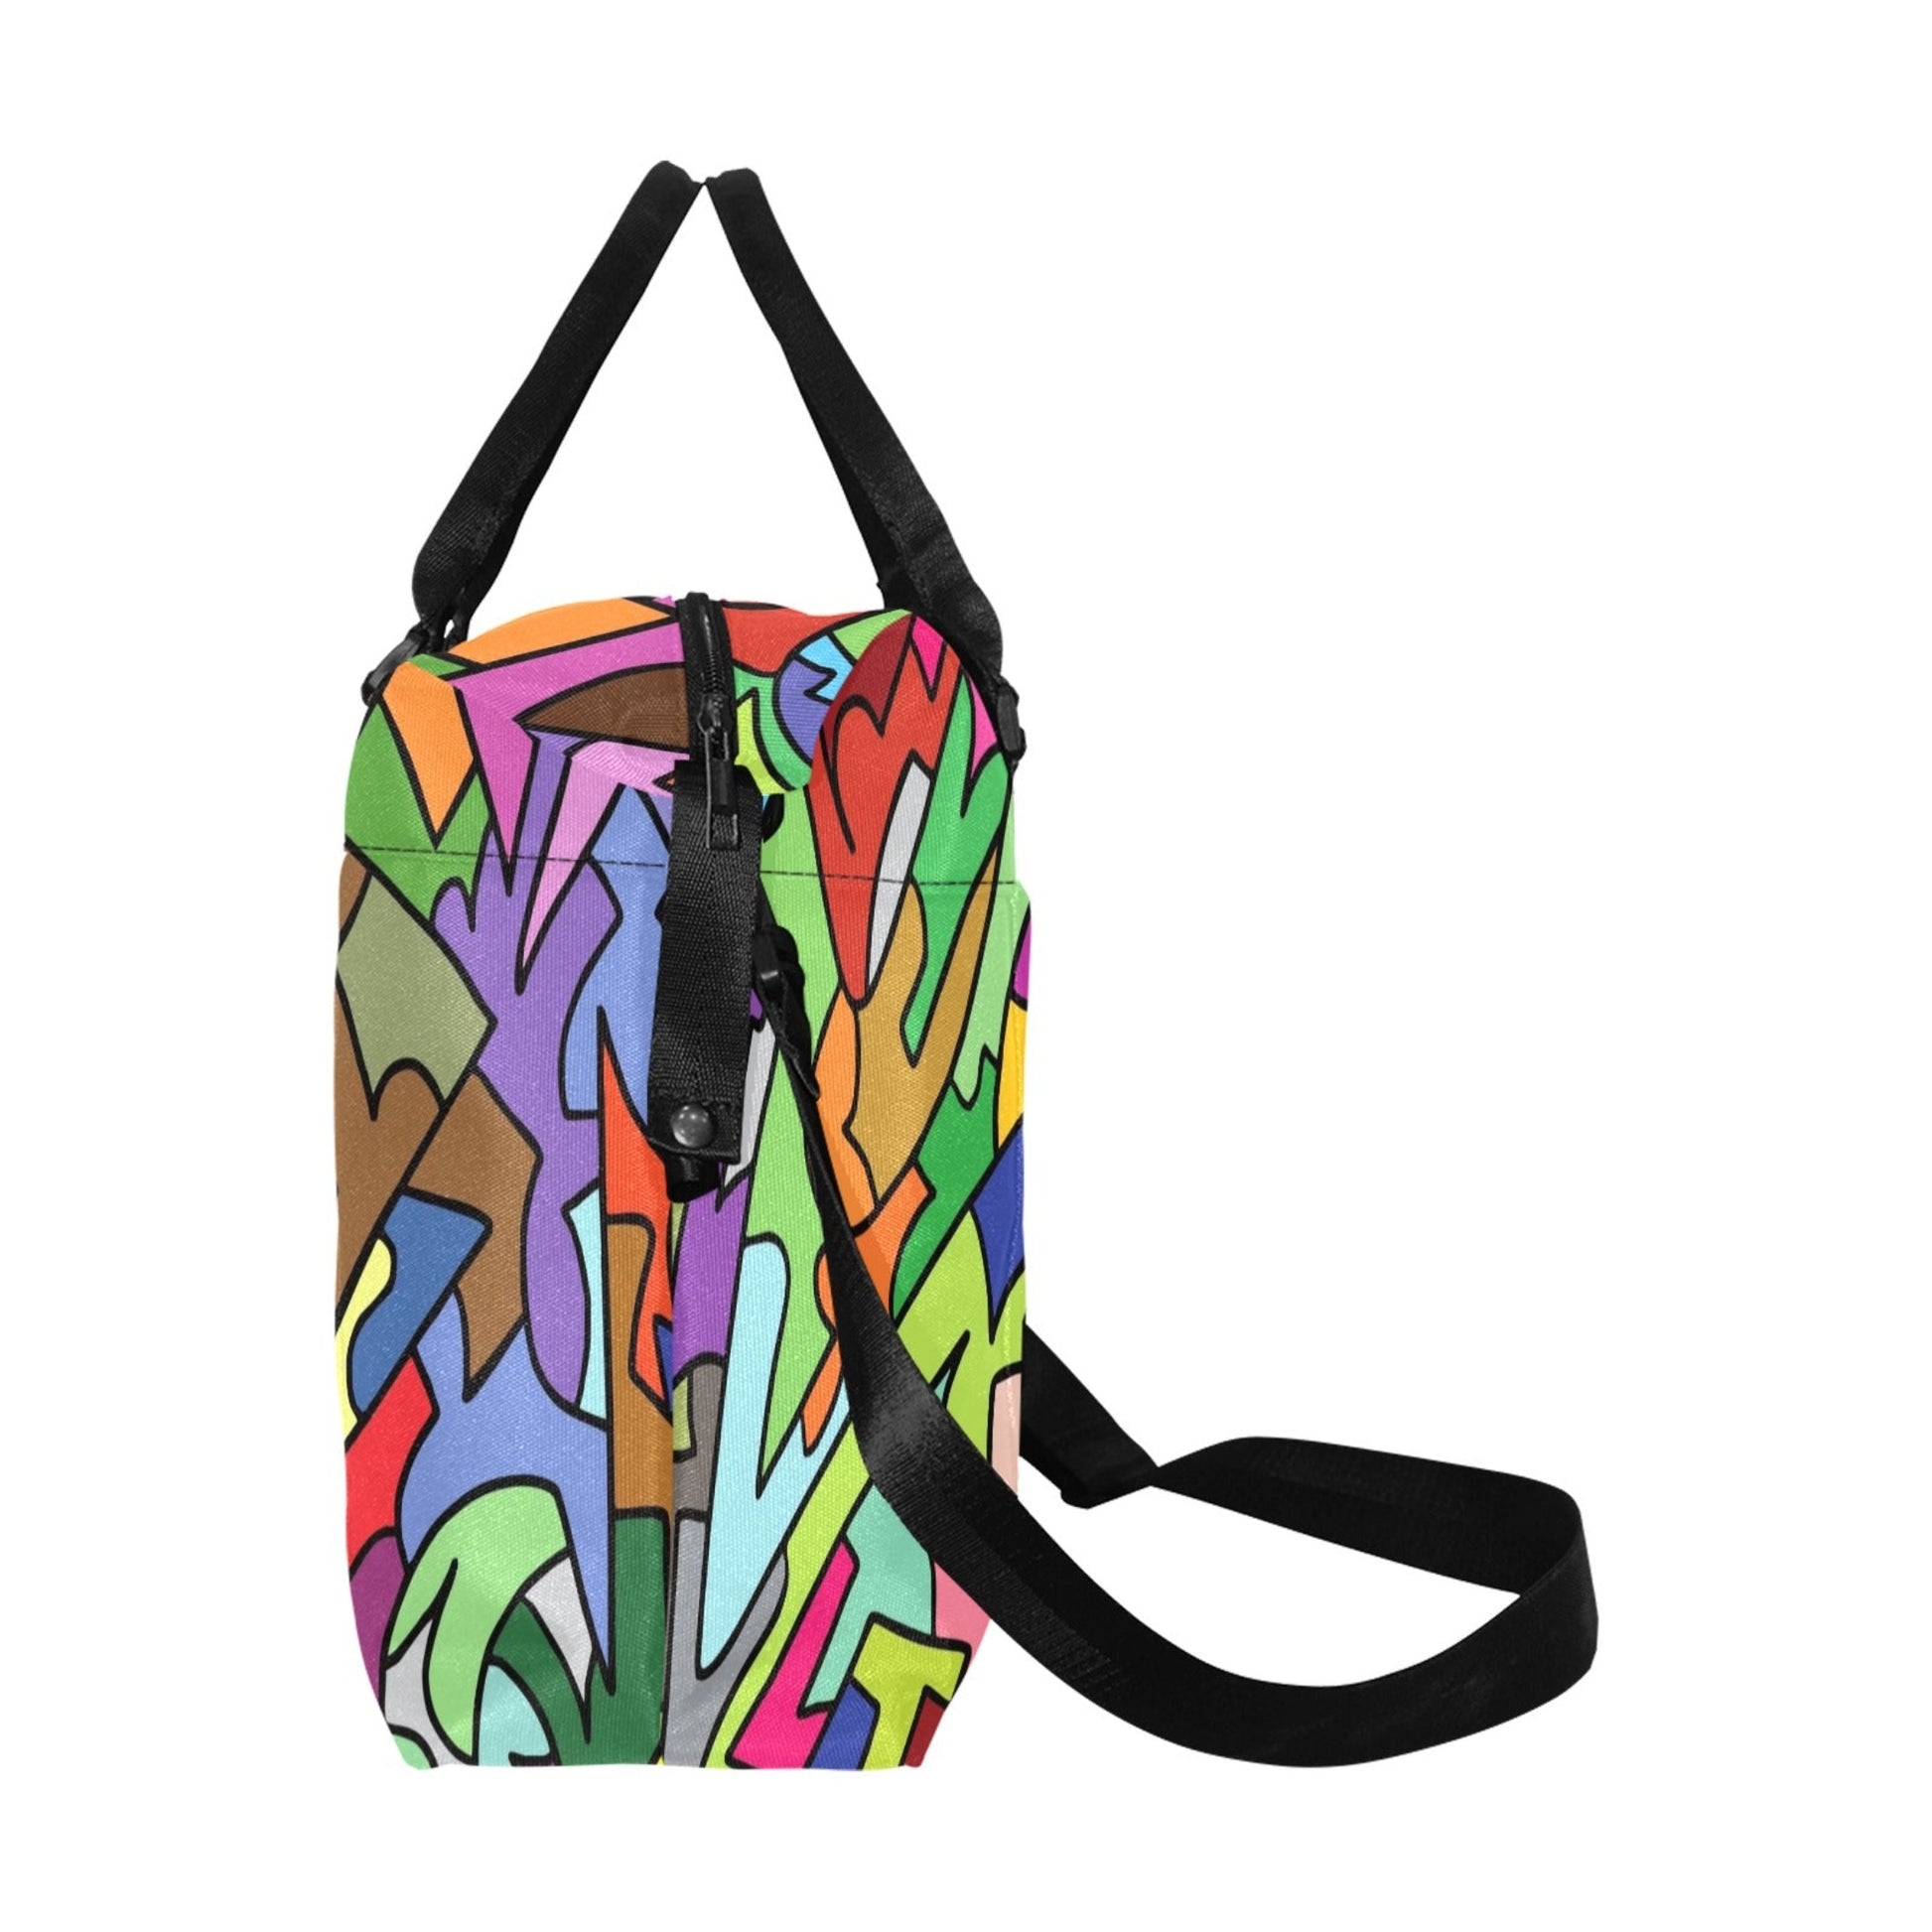 Bright Abstract - Square Duffle Bag Square Duffle Bag